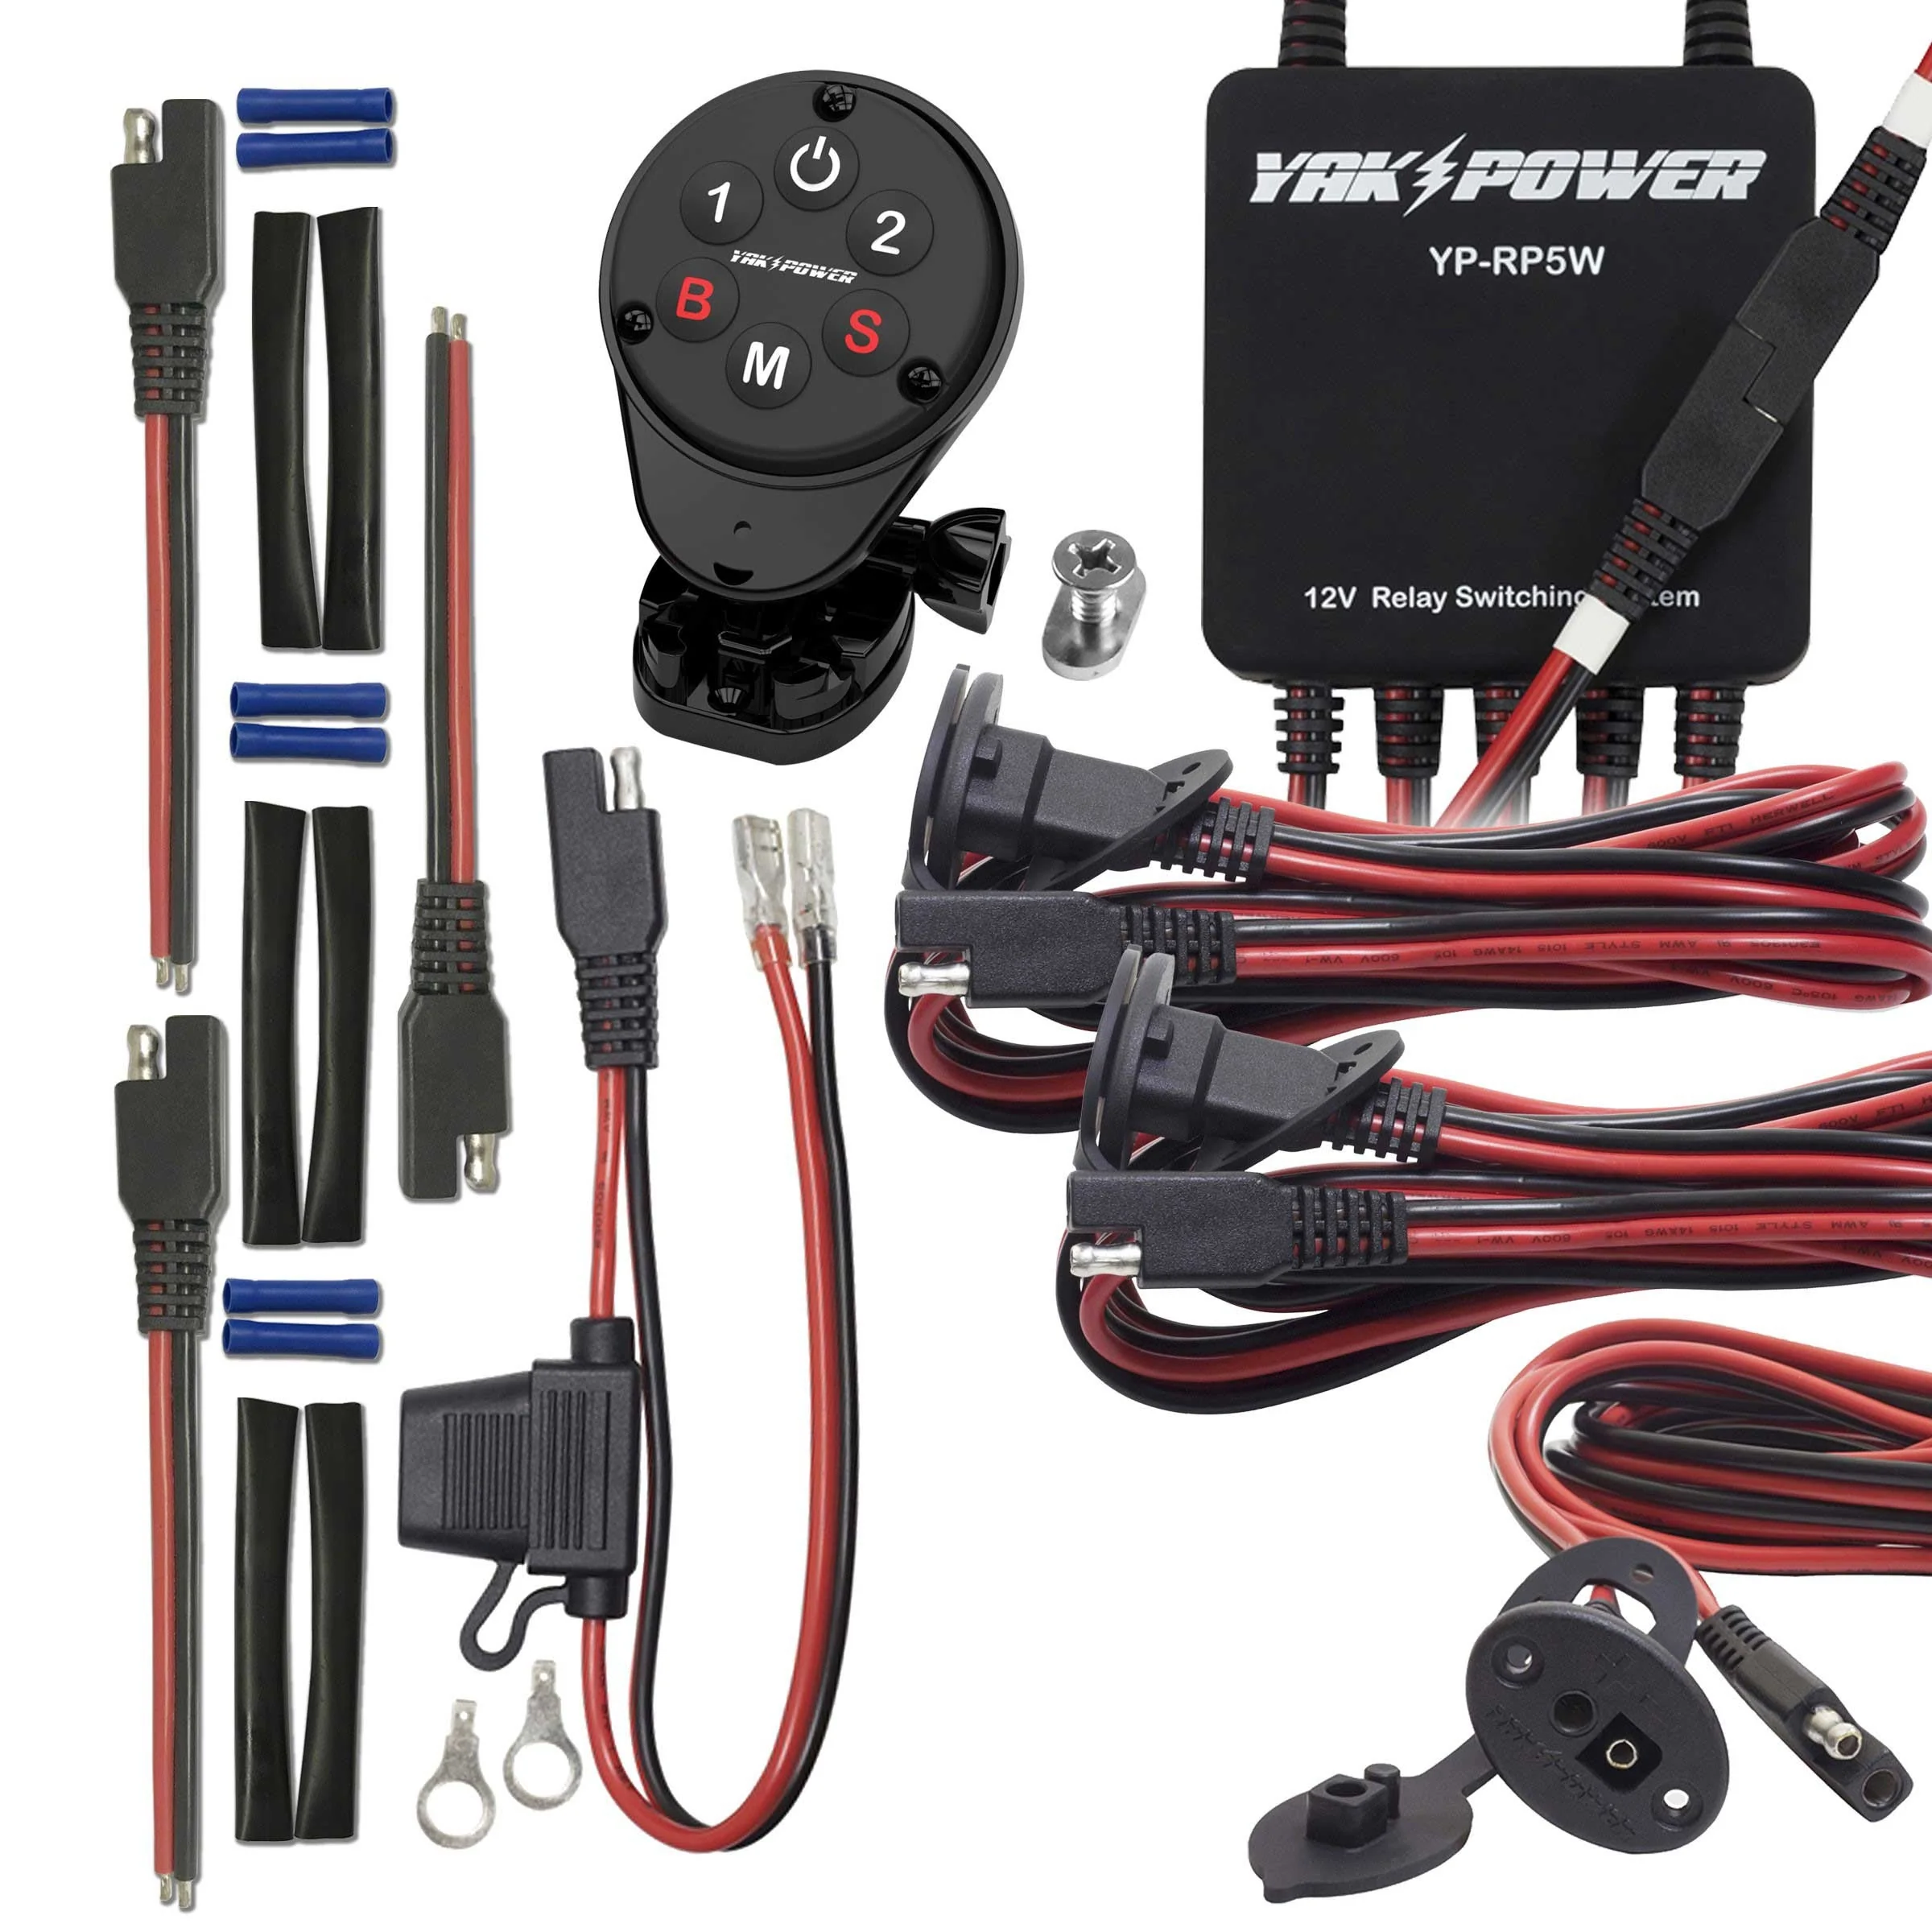 What do I need to run 2 batteries for trolling motor, fish finder